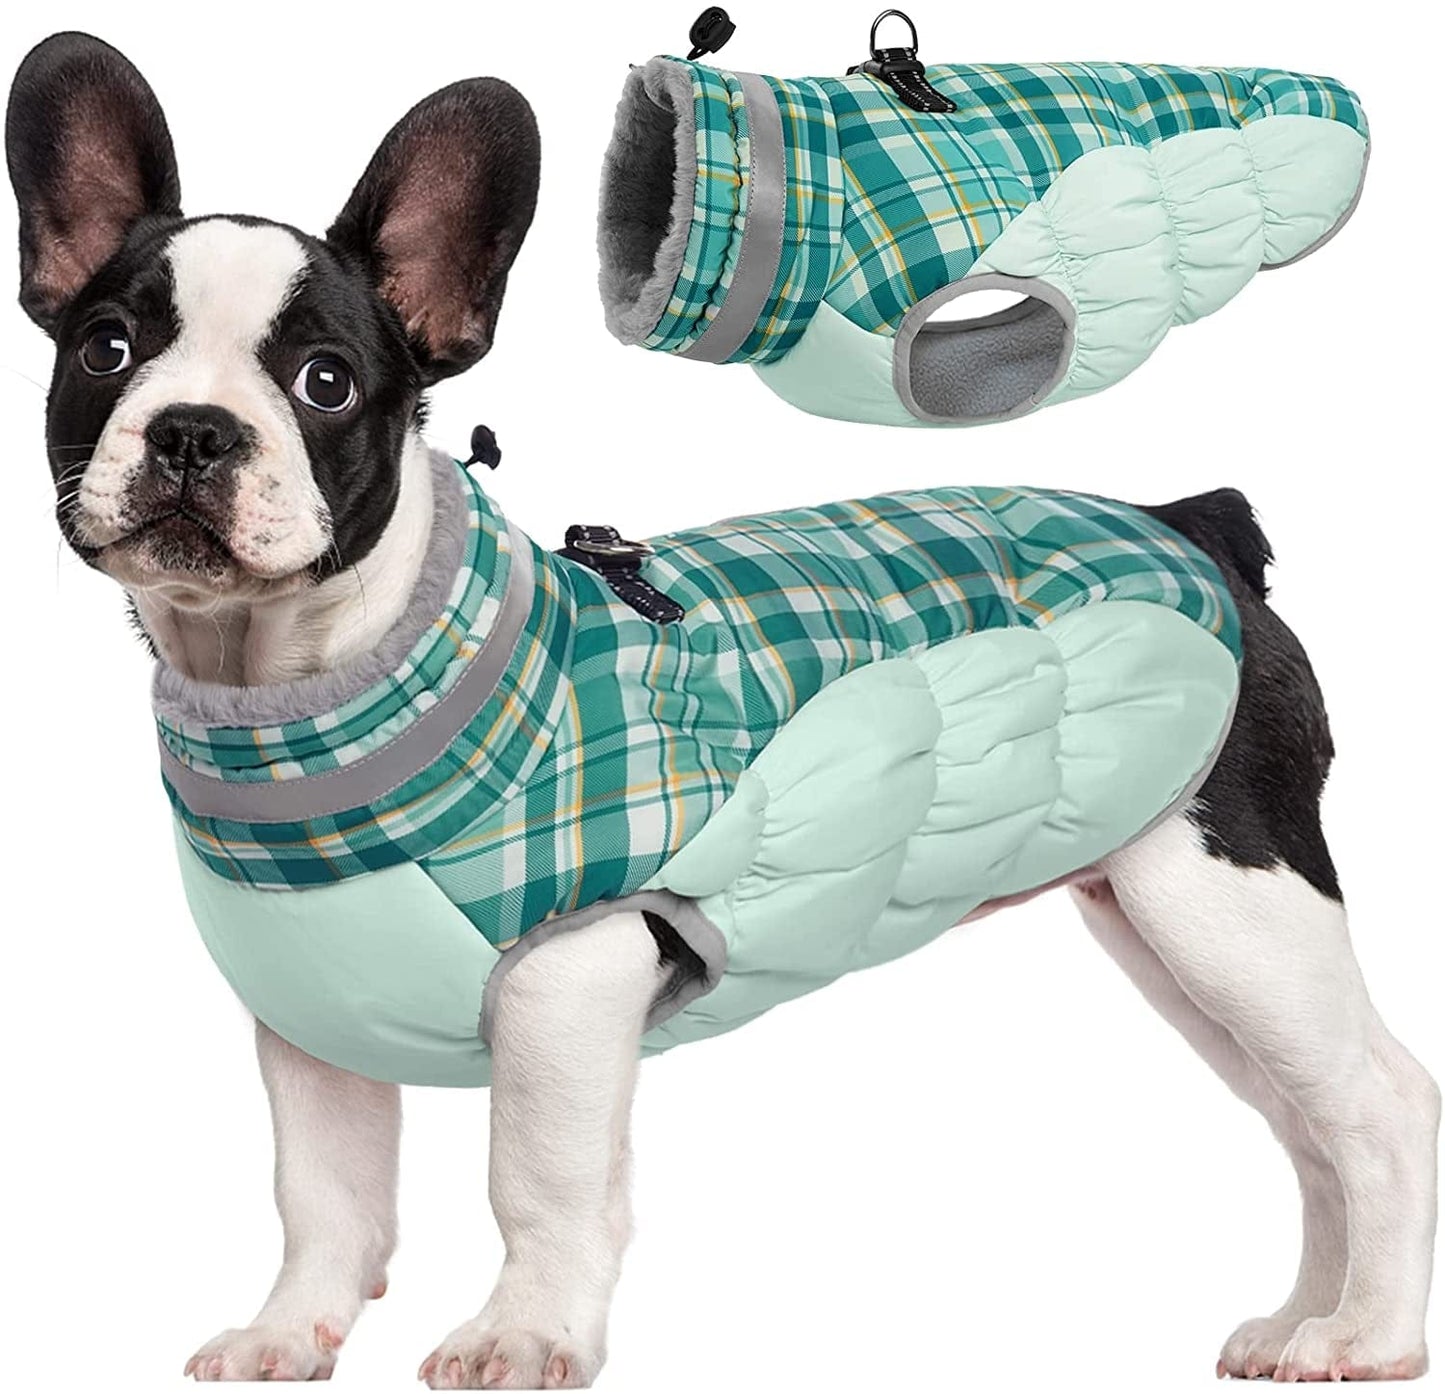 FUAMEY Dog Winter Jacket,Dog Cold Weather Coats Paded Dog Vest Warm Zip up Dog Windproof Apparel Pet Fleece Lined Outfit for Small Medium Large Dogs with Harness Cozy Dog Clothes with Fur Collar